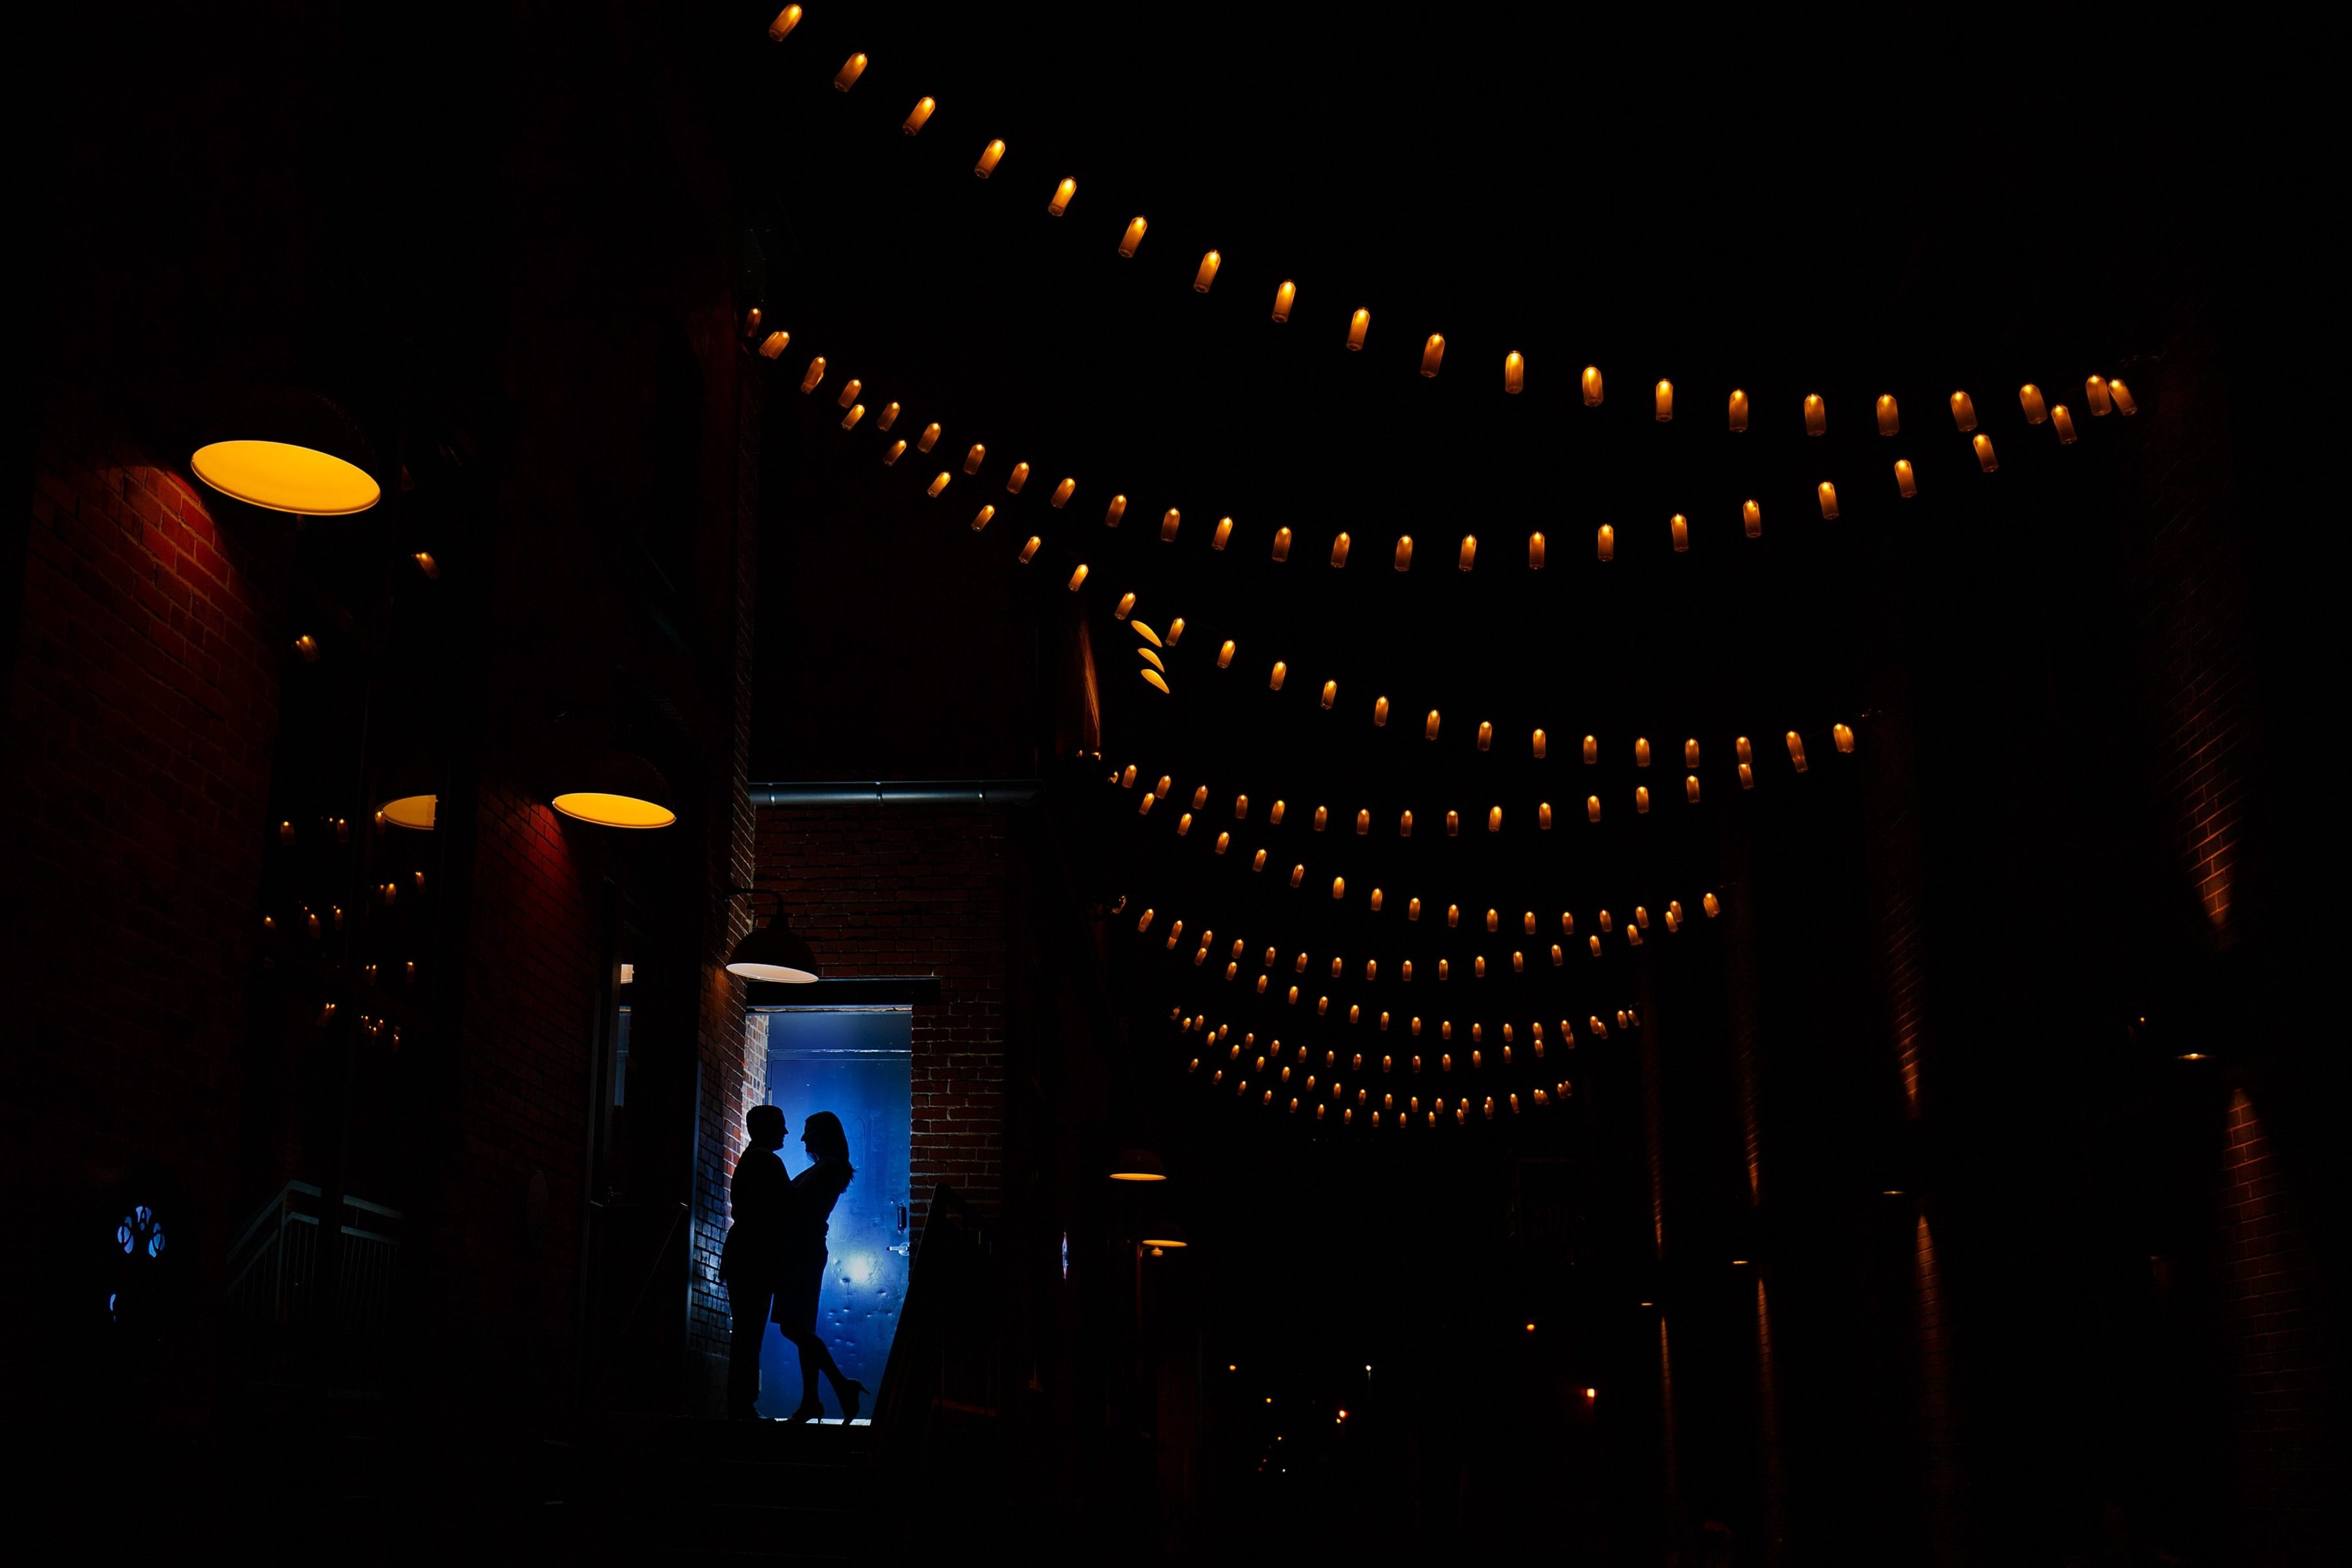 Joel and Katie share a moment together at The Dairy Block at night in downtown Denver during their spring engagement photos